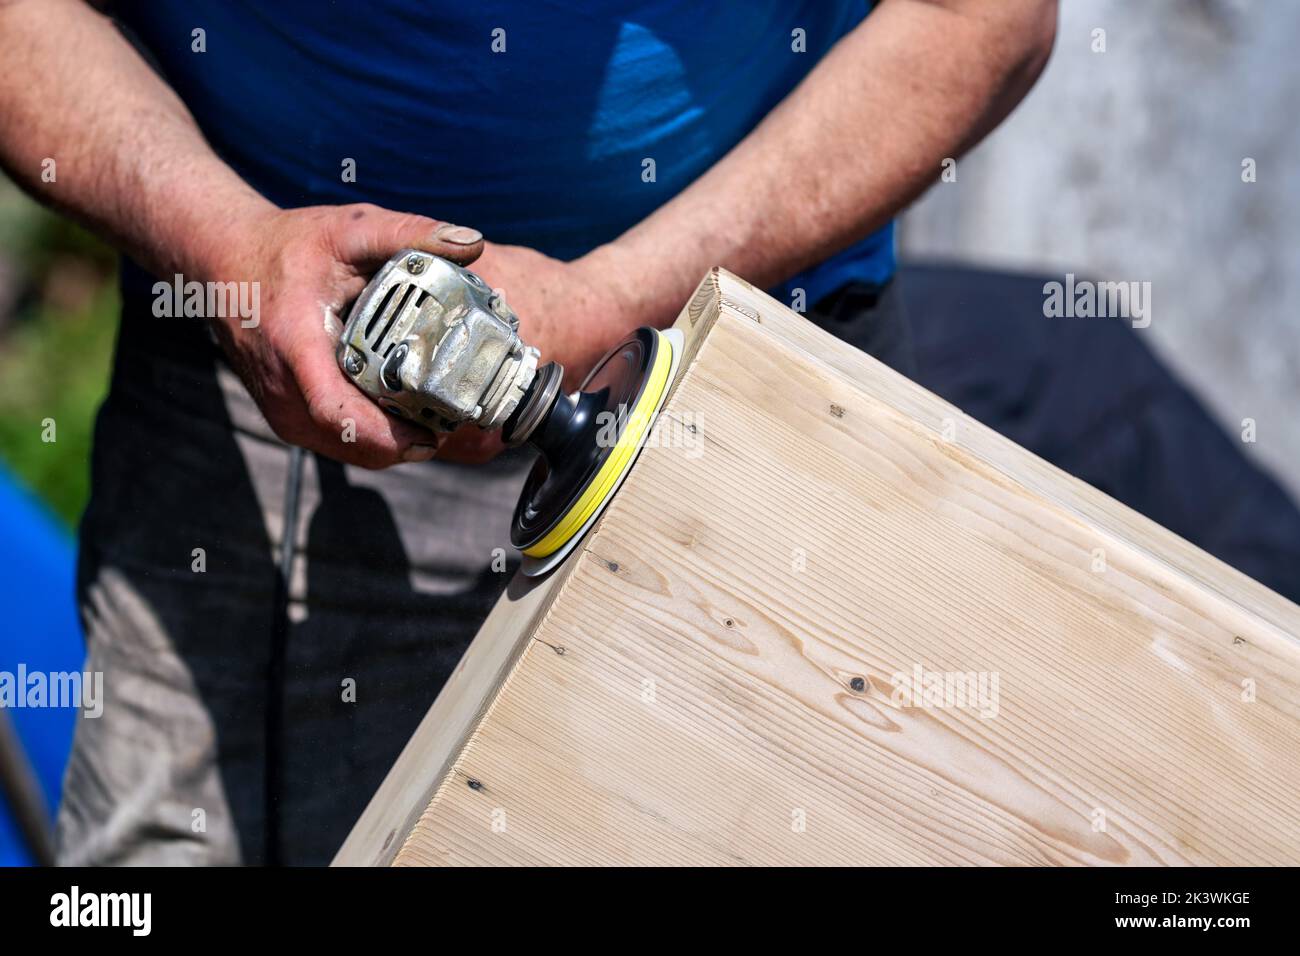 Man polishing wooden chest with old angle grinder during sunny day, closeup detail to hands without gloves Stock Photo